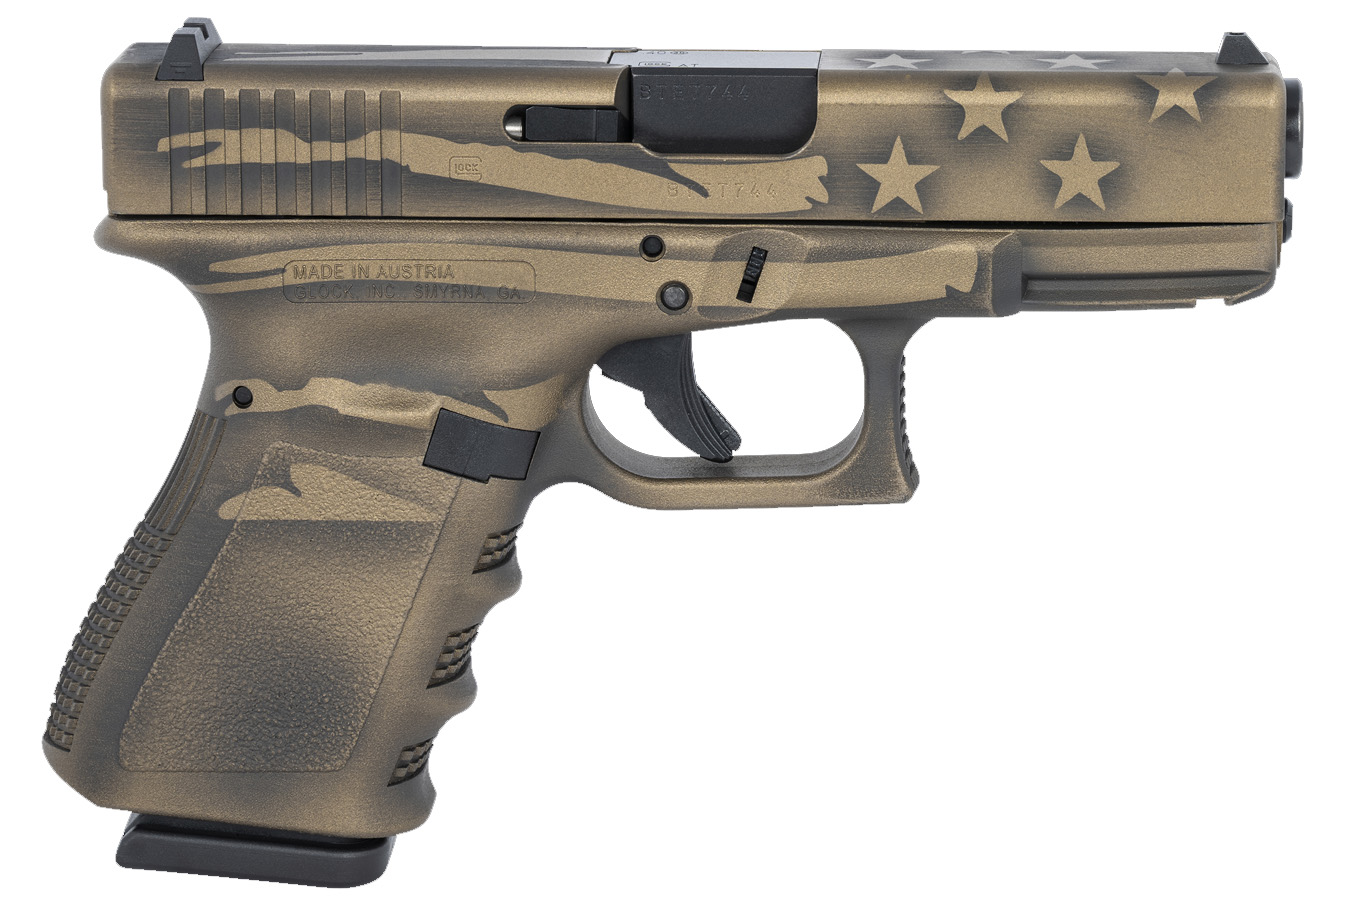 23 40SW COMPACT PISTOL WITH COYOTE BATTLE WORN FLAG CERAKOTE FINISH